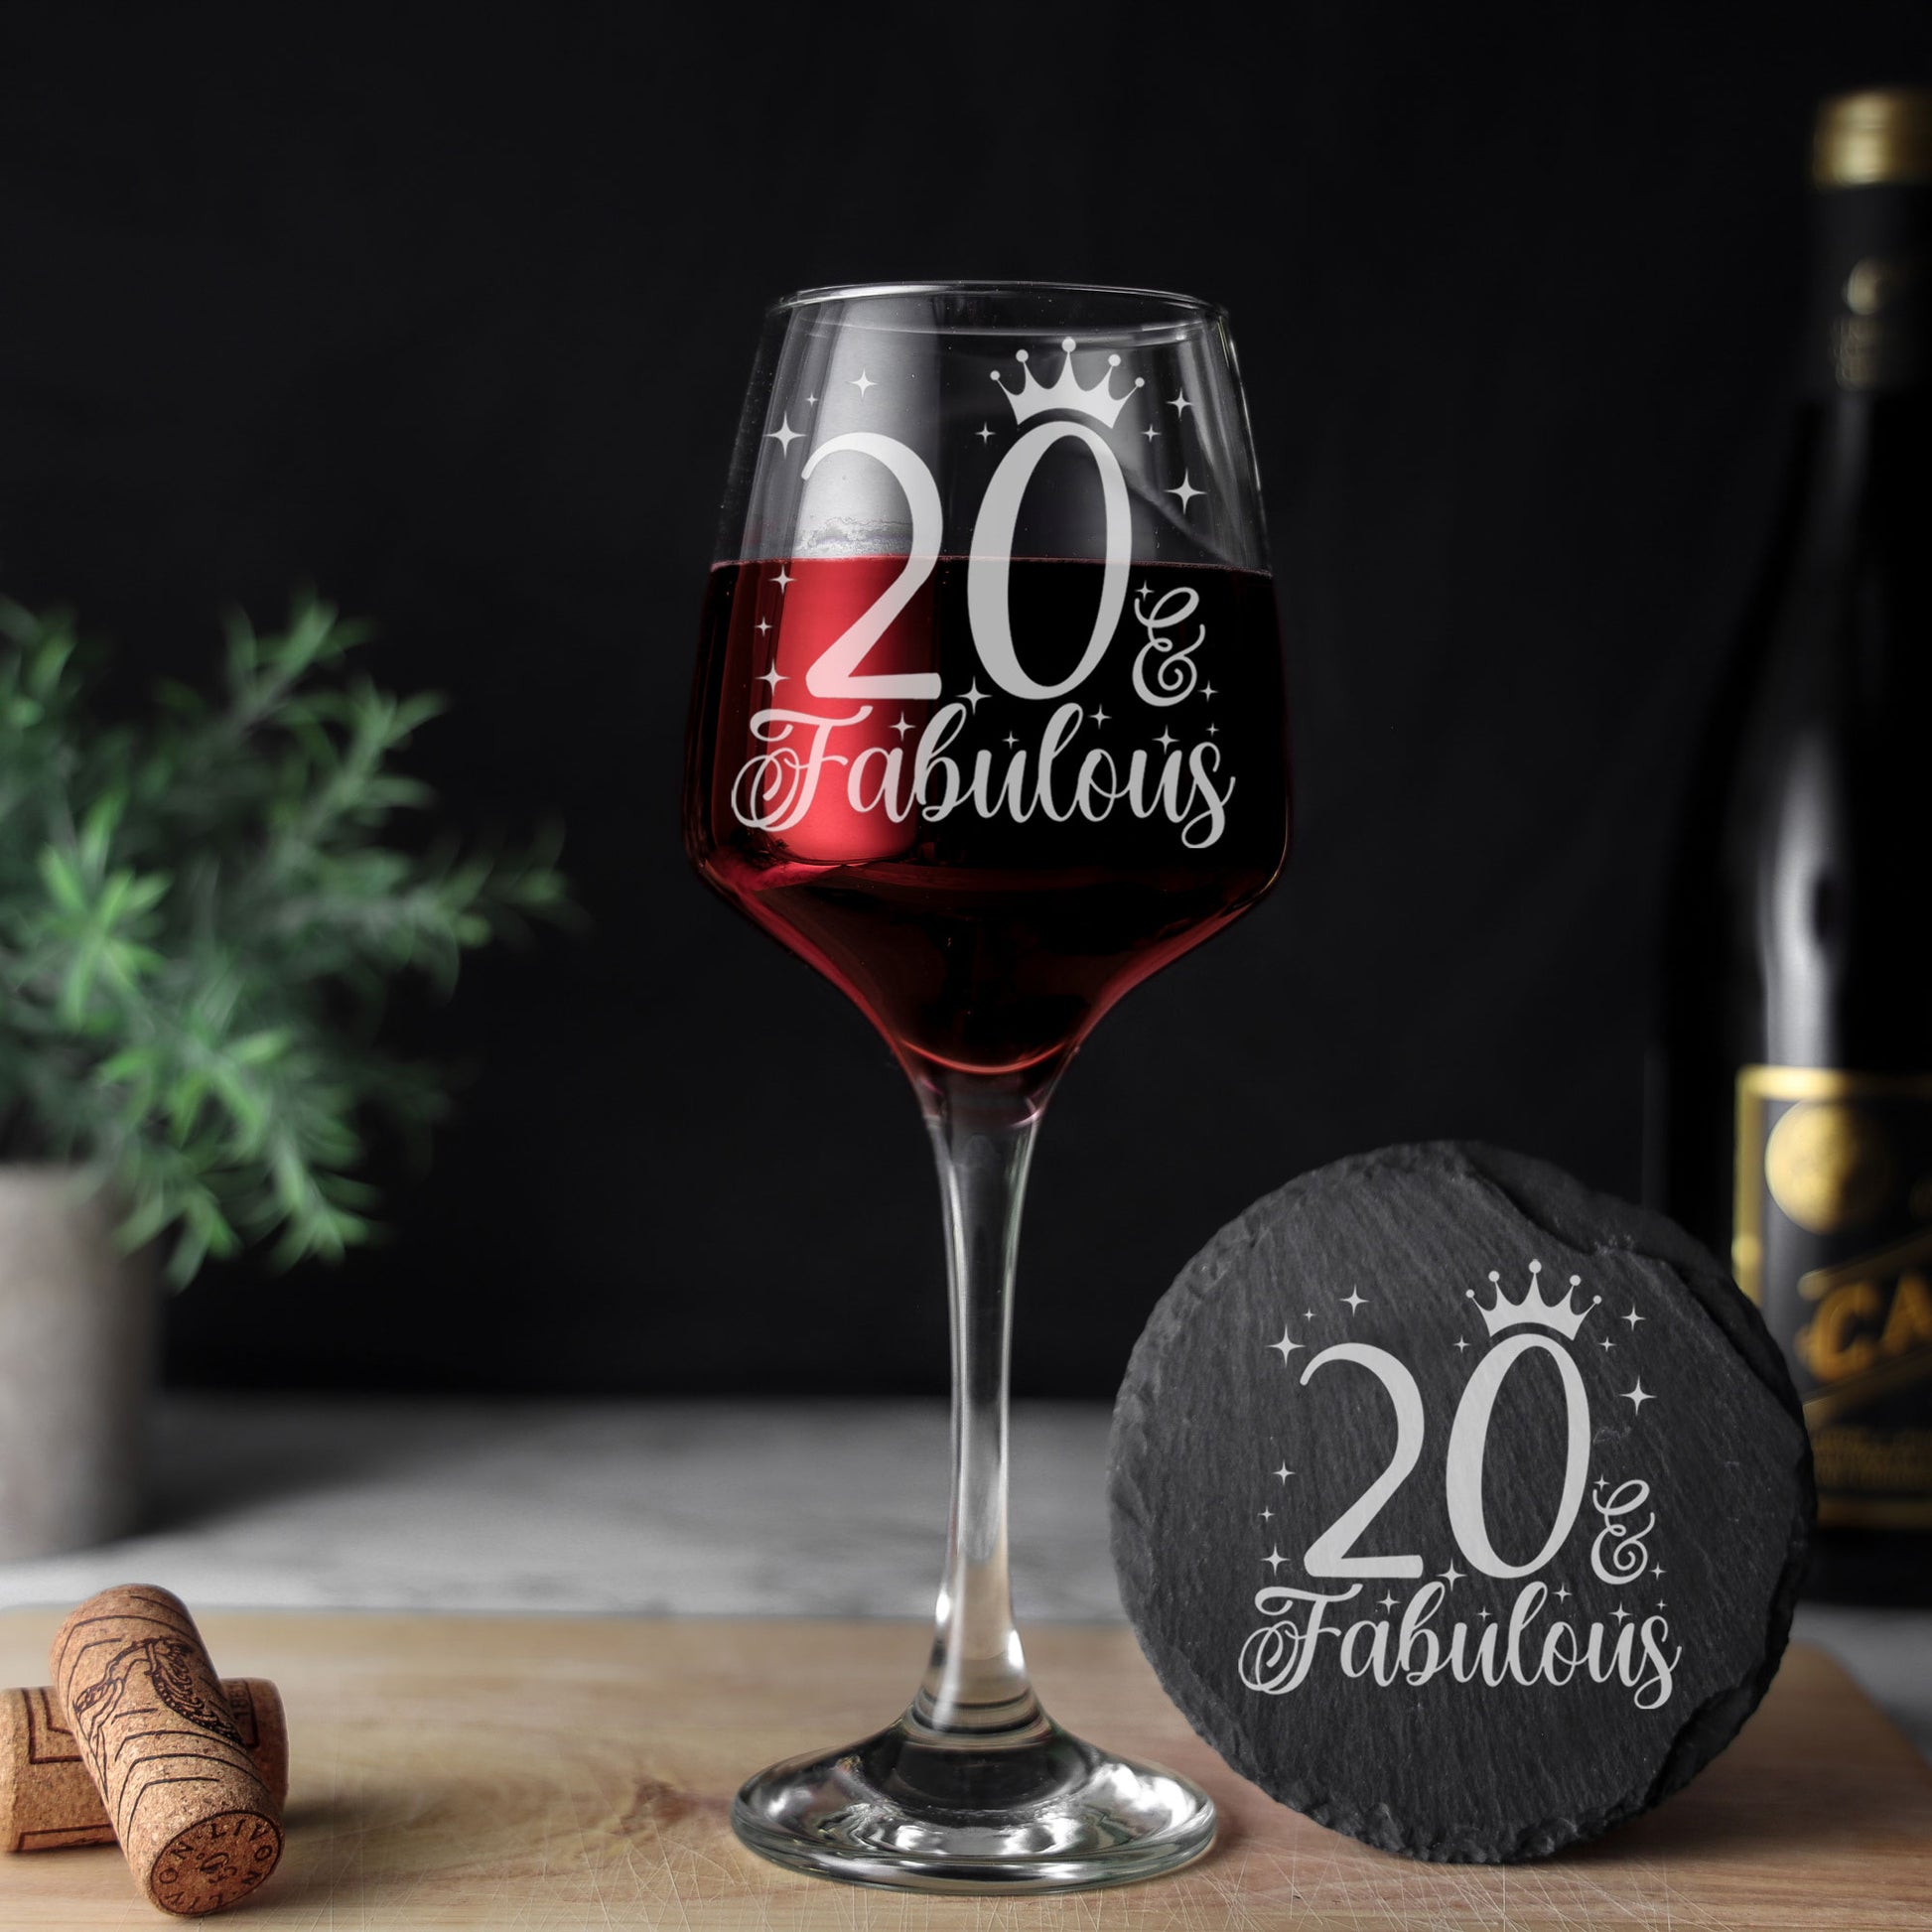 20 & Fabulous 20th Birthday Gift Engraved Wine Glass and/or Coaster Set  - Always Looking Good - Glass & Round Coaster  